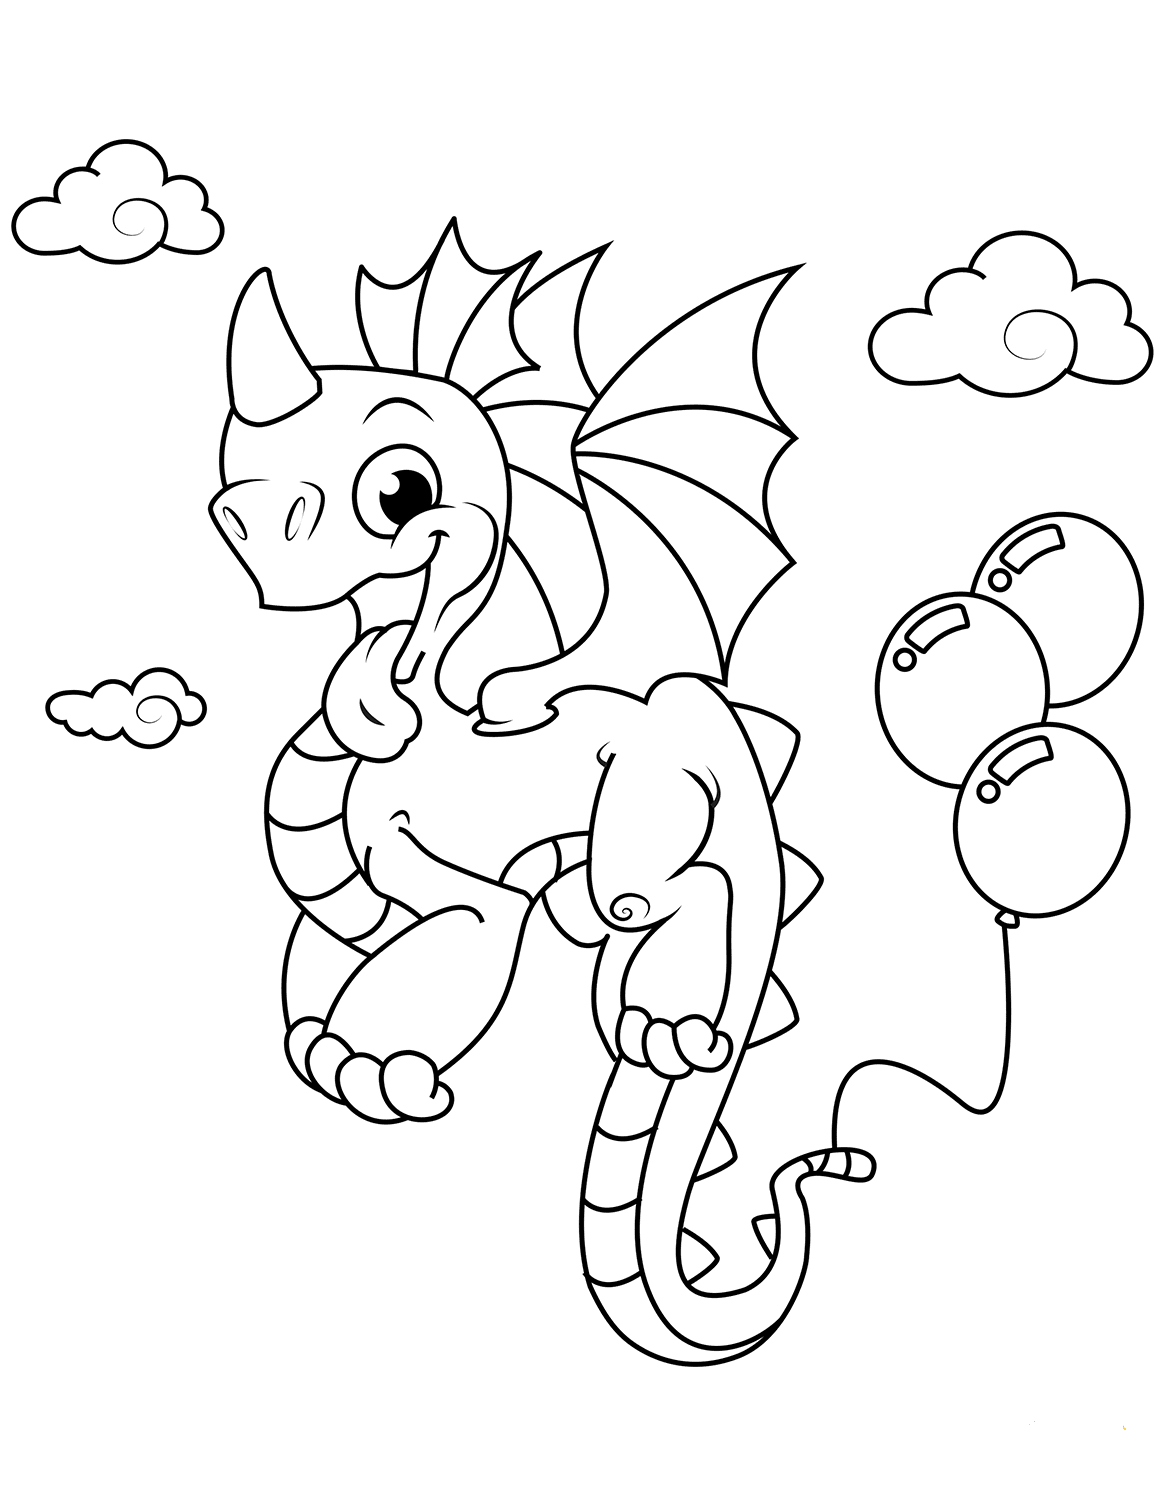 free coloring pages dragons free printable dragon coloring pages for kids lettas pages coloring dragons free 